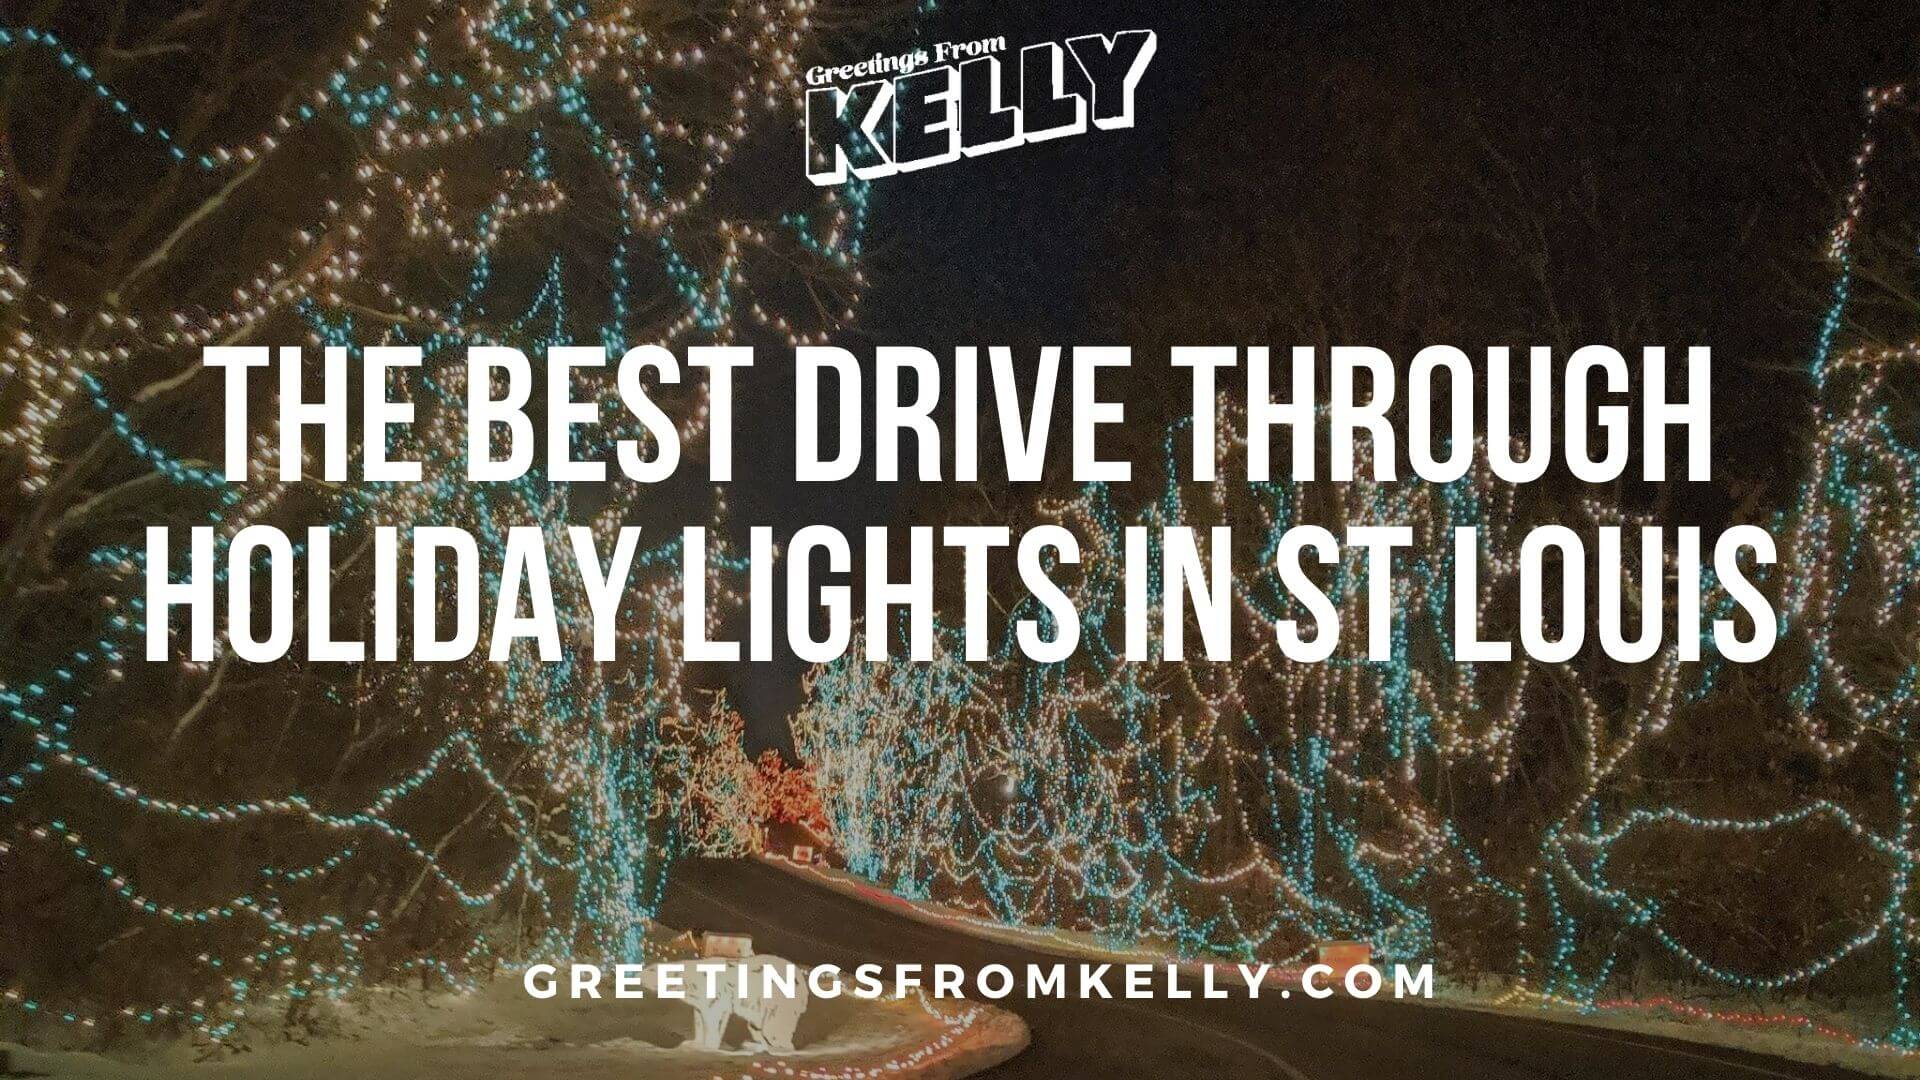 The Best Drive Through Holiday Lights in St Louis